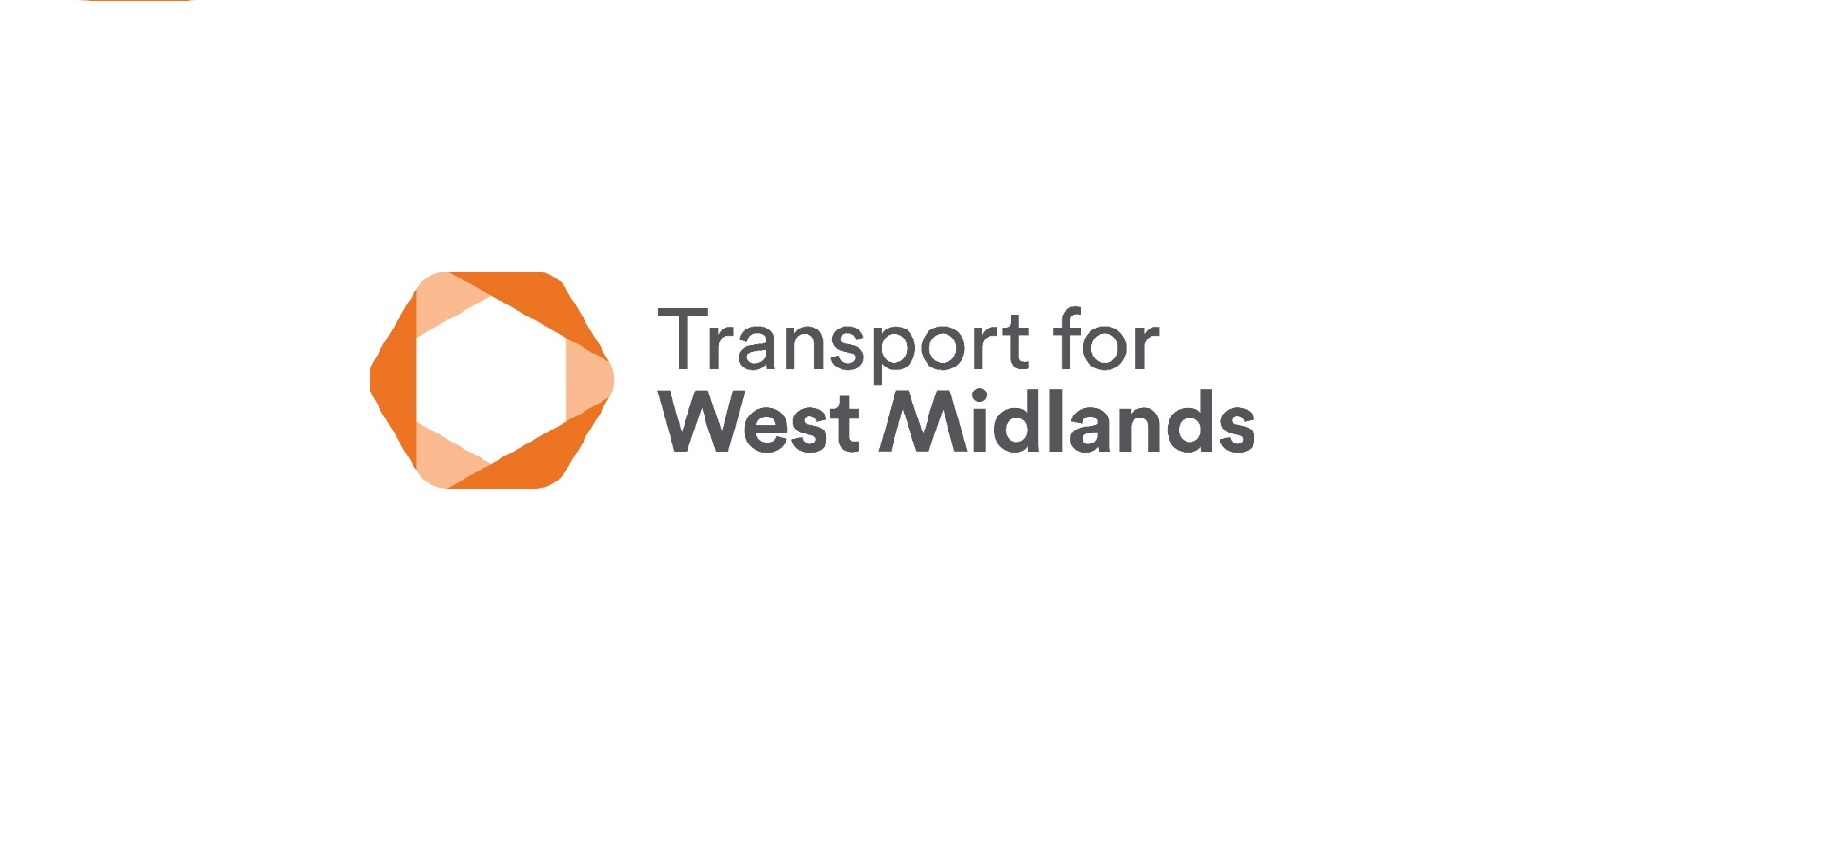 £30m bus priority announced for West Midlands